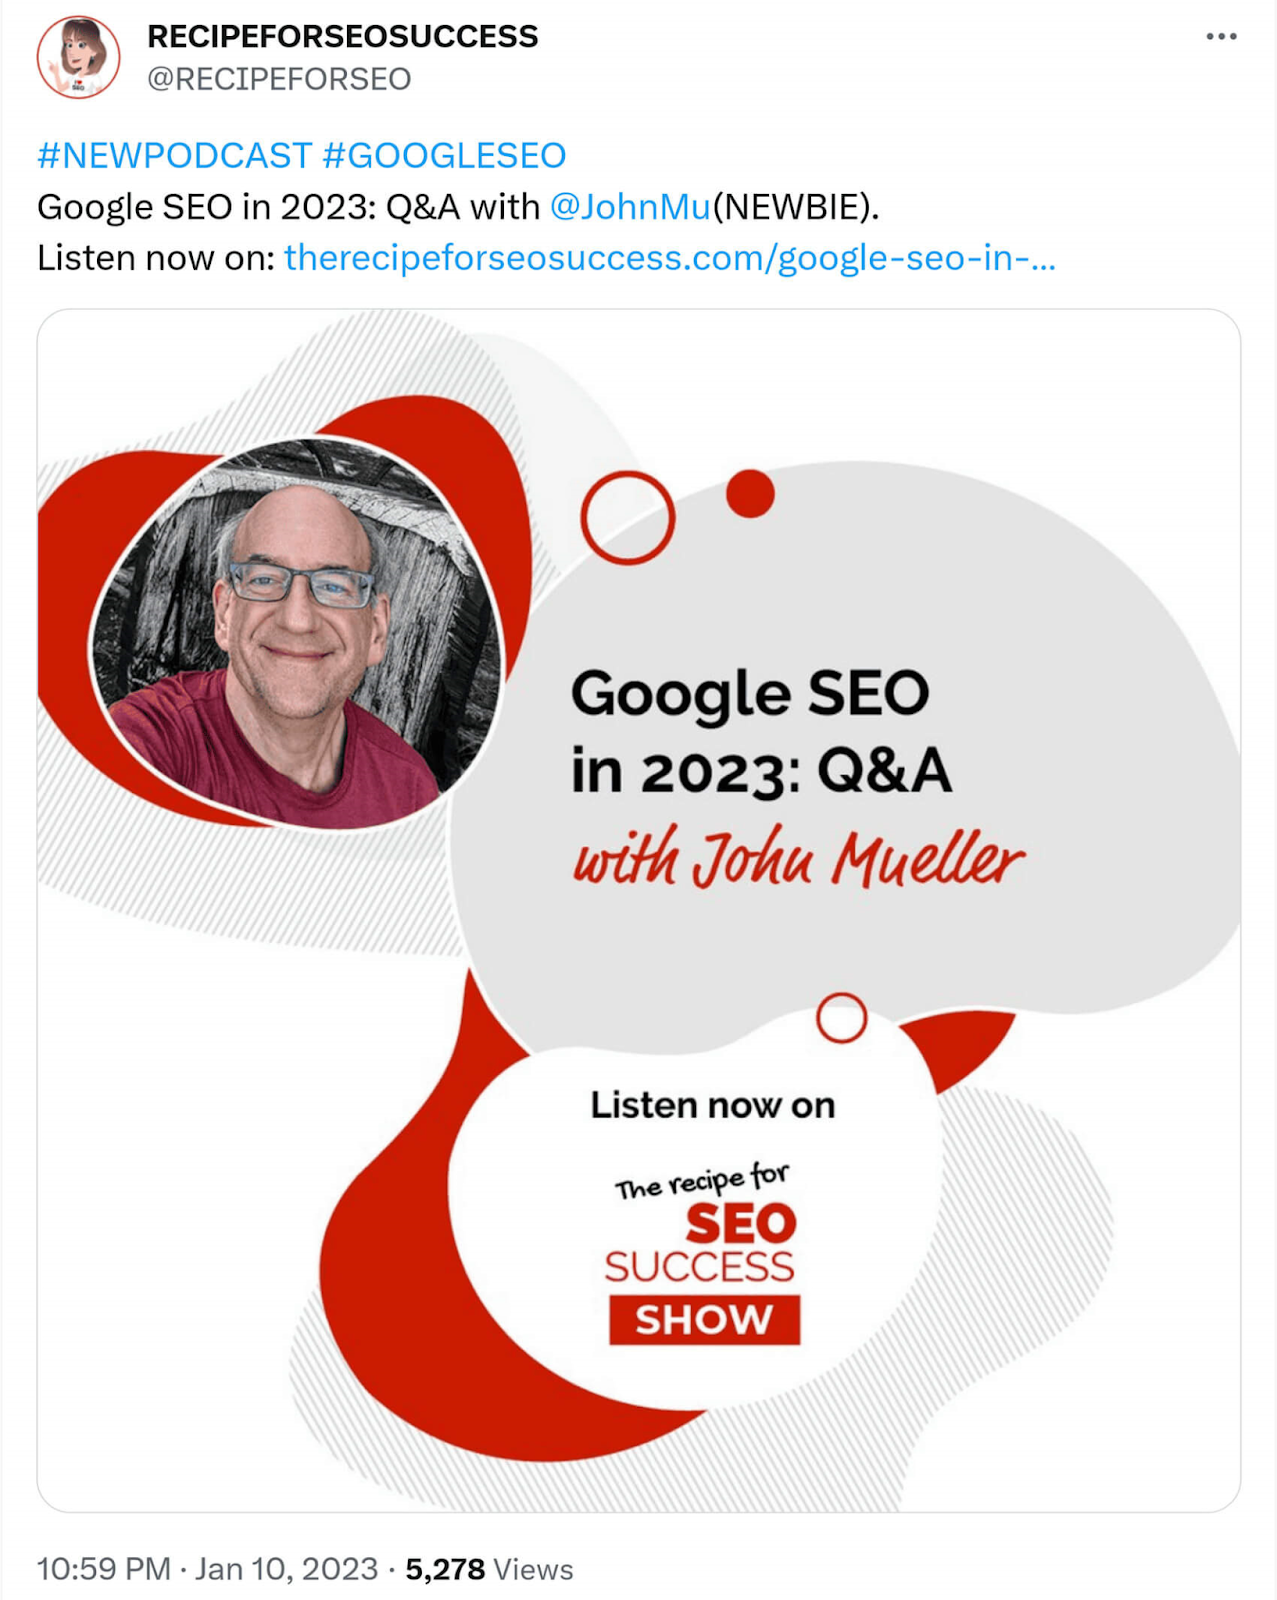 @RECIPEFORSEOSUCCESS post on X, promoting a podcast episode on Google SEO in 2023 with John Mueller